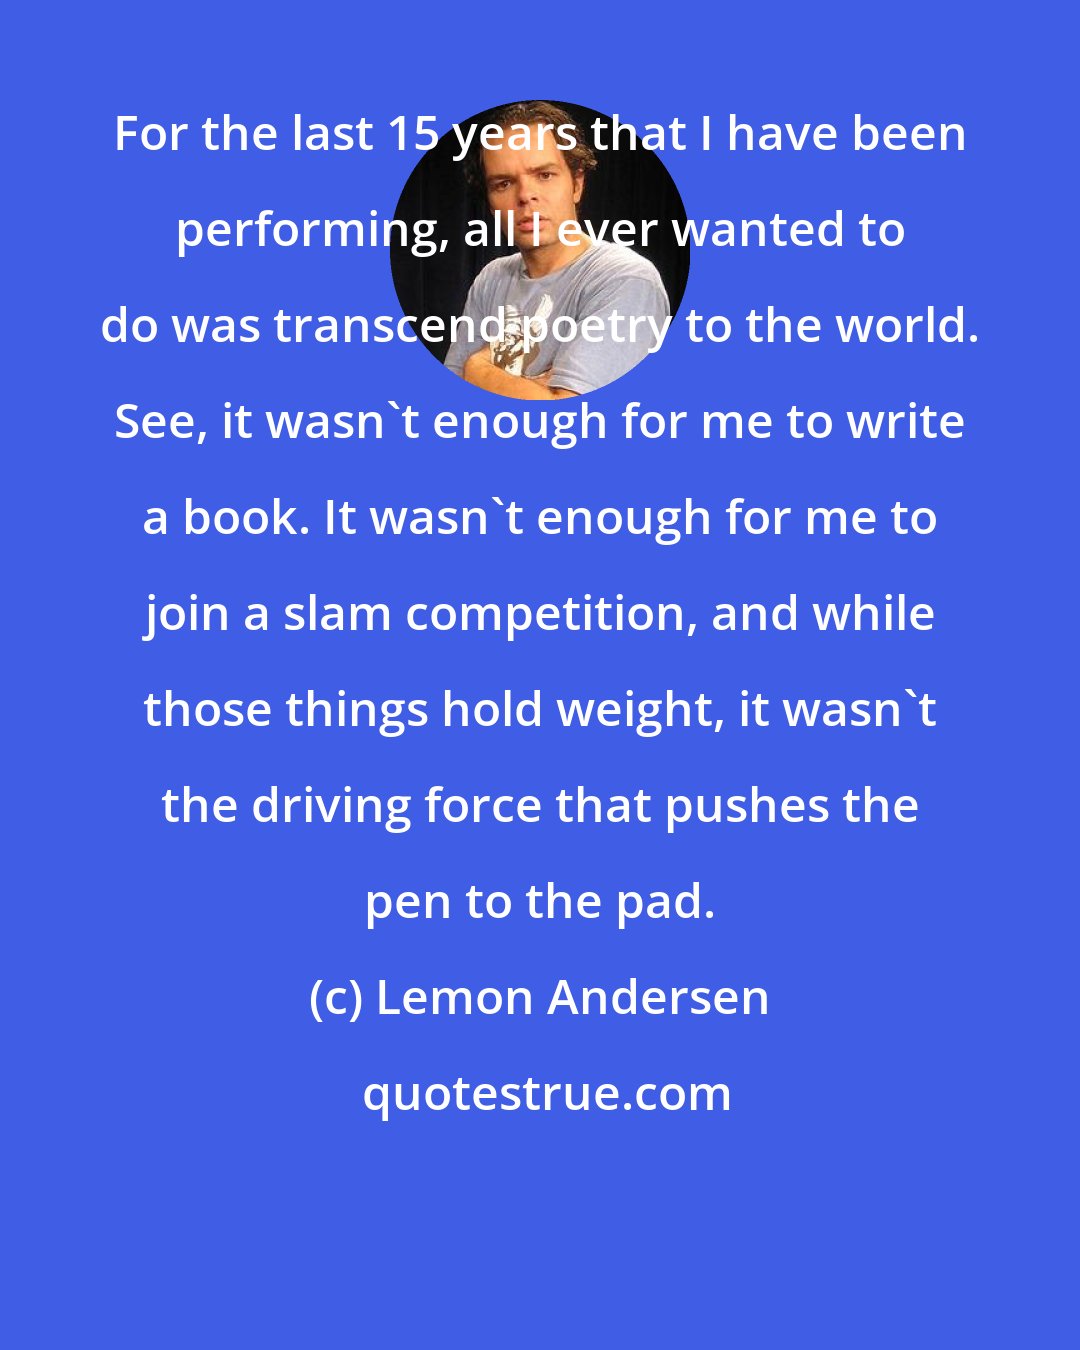 Lemon Andersen: For the last 15 years that I have been performing, all I ever wanted to do was transcend poetry to the world. See, it wasn't enough for me to write a book. It wasn't enough for me to join a slam competition, and while those things hold weight, it wasn't the driving force that pushes the pen to the pad.